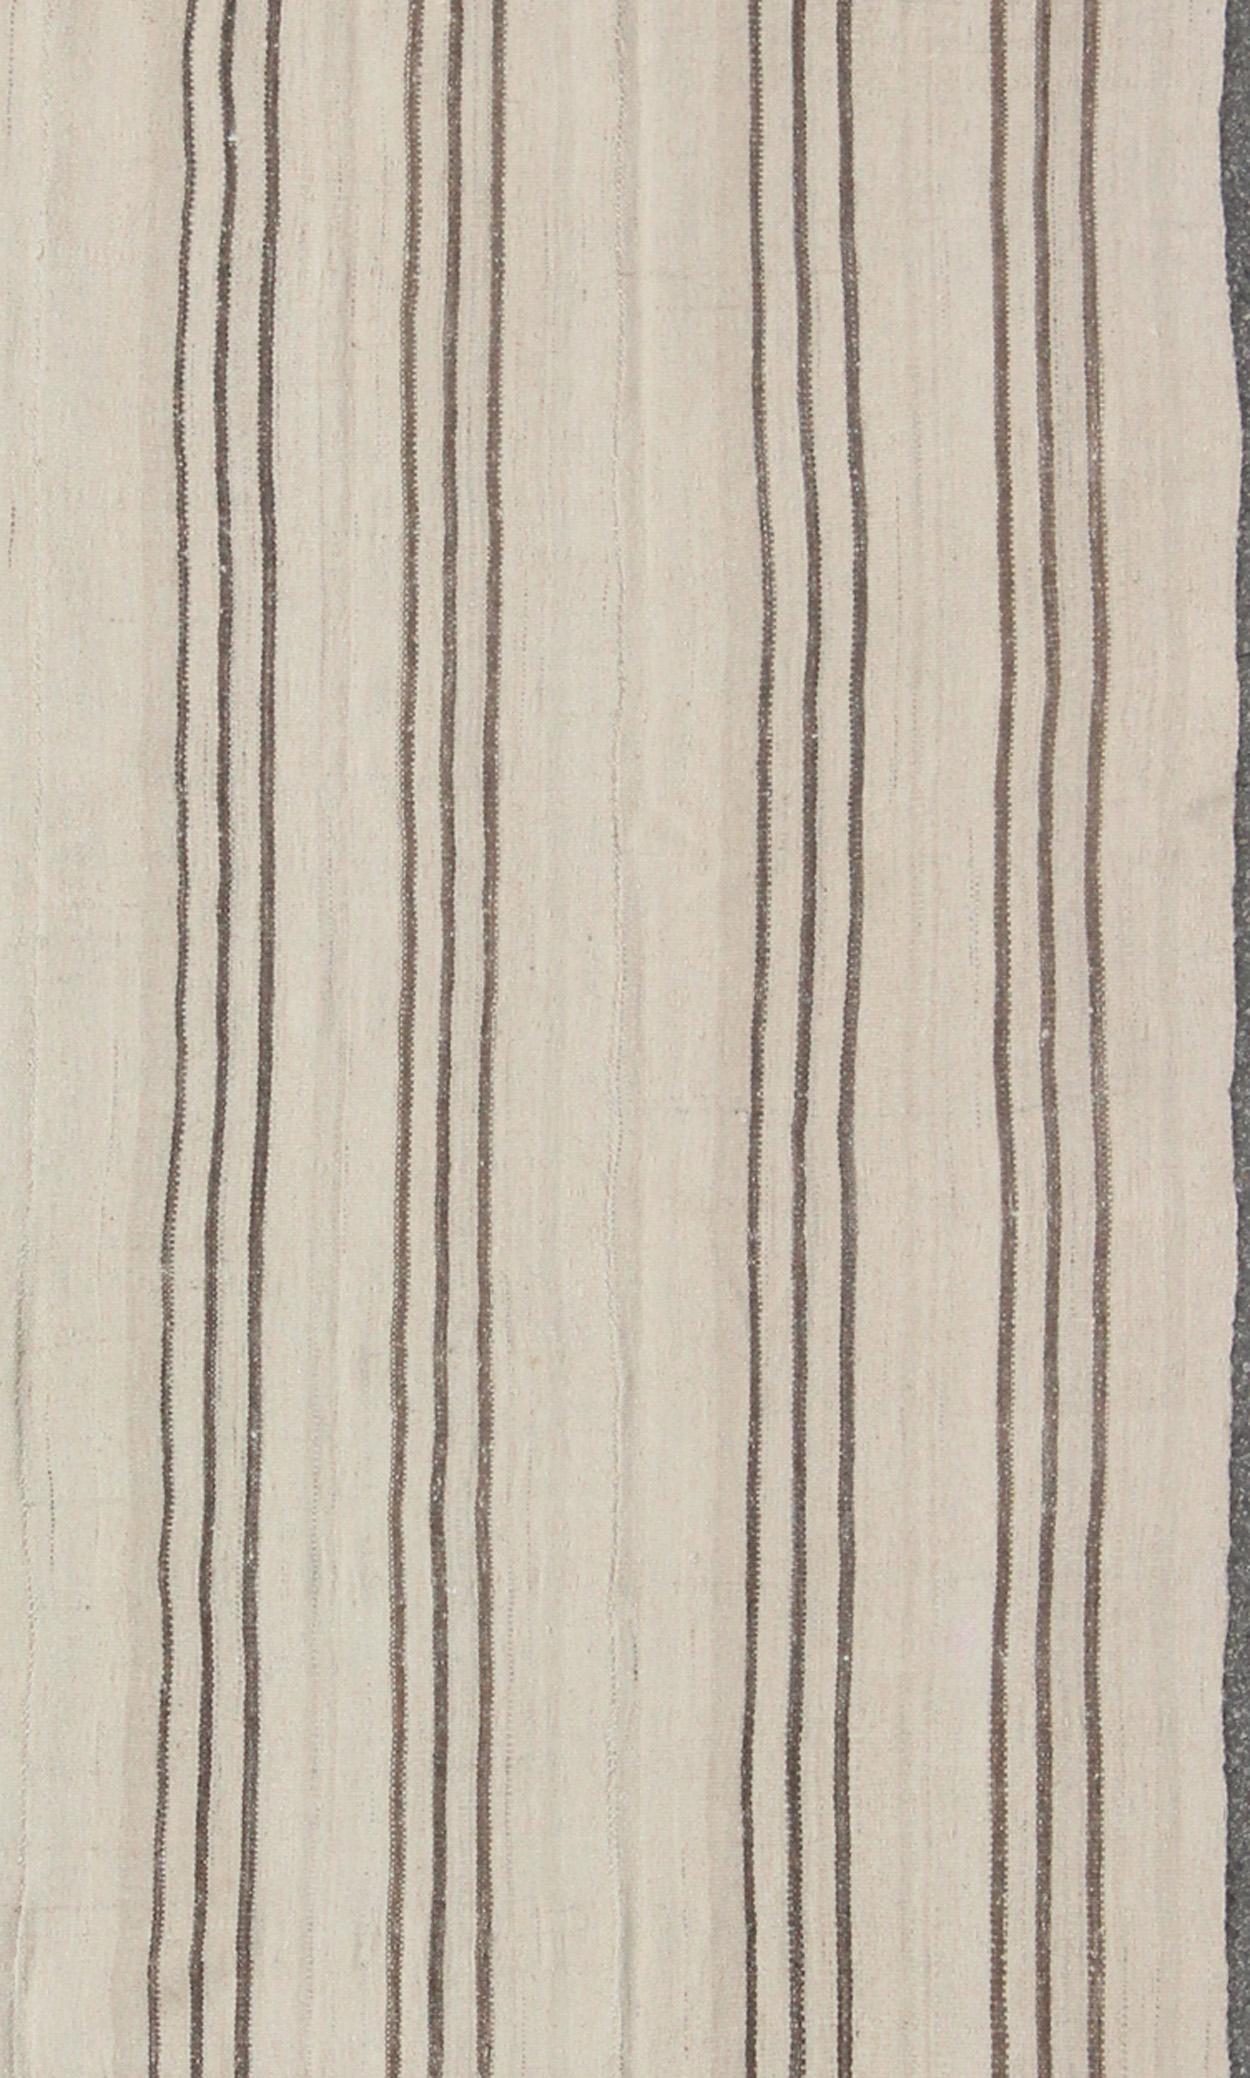 Ivory and brown vintage Kilim from Turkey with Minimalist design in stripes, rug/TU-NED-4720, country of origin / type: Turkey / Kilim, circa 1950

This vintage striped design Kilim from Turkey rendered in shade of brown's, taupe's and ivory